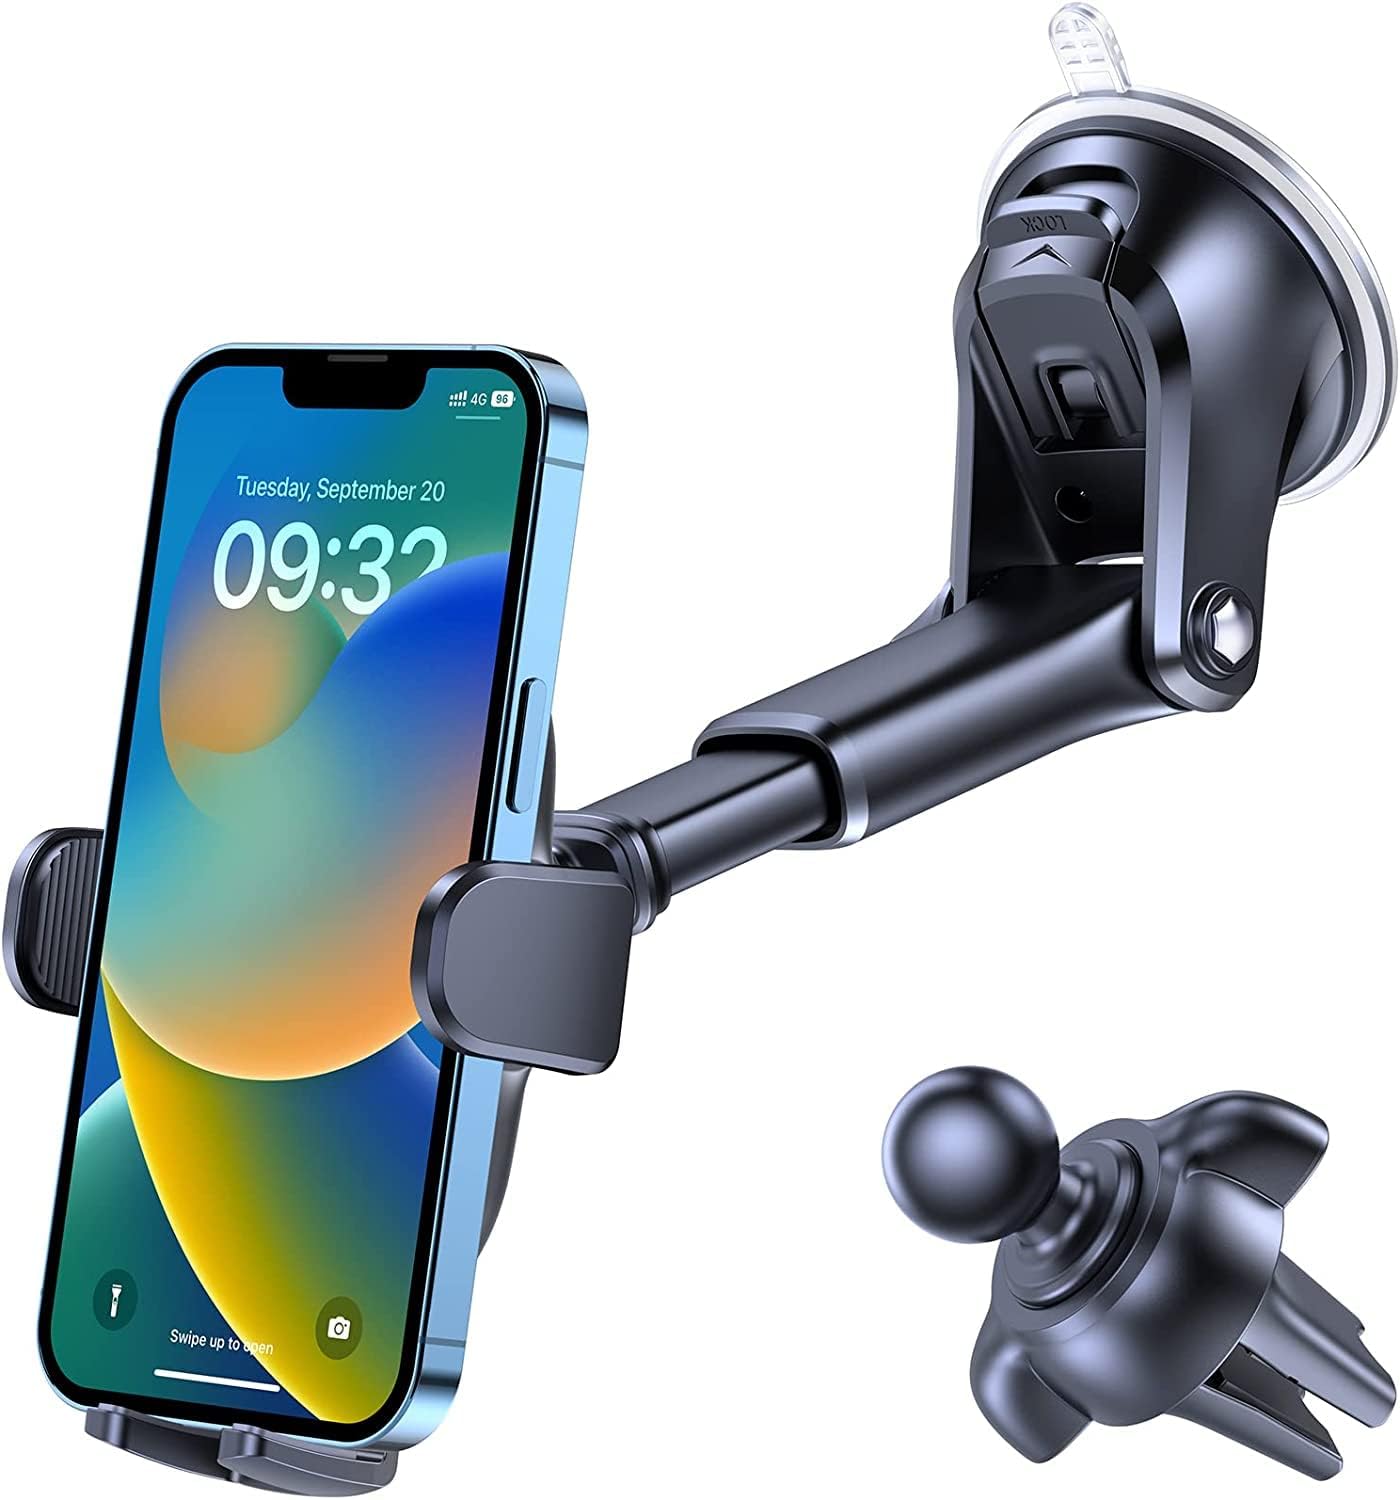 3-in-1 Suction Cup Phone Holder for Windshield/Dashboard/Air Vent with Strong Sticky Gel Pad, Compatible with iPhone, Samsung & Others